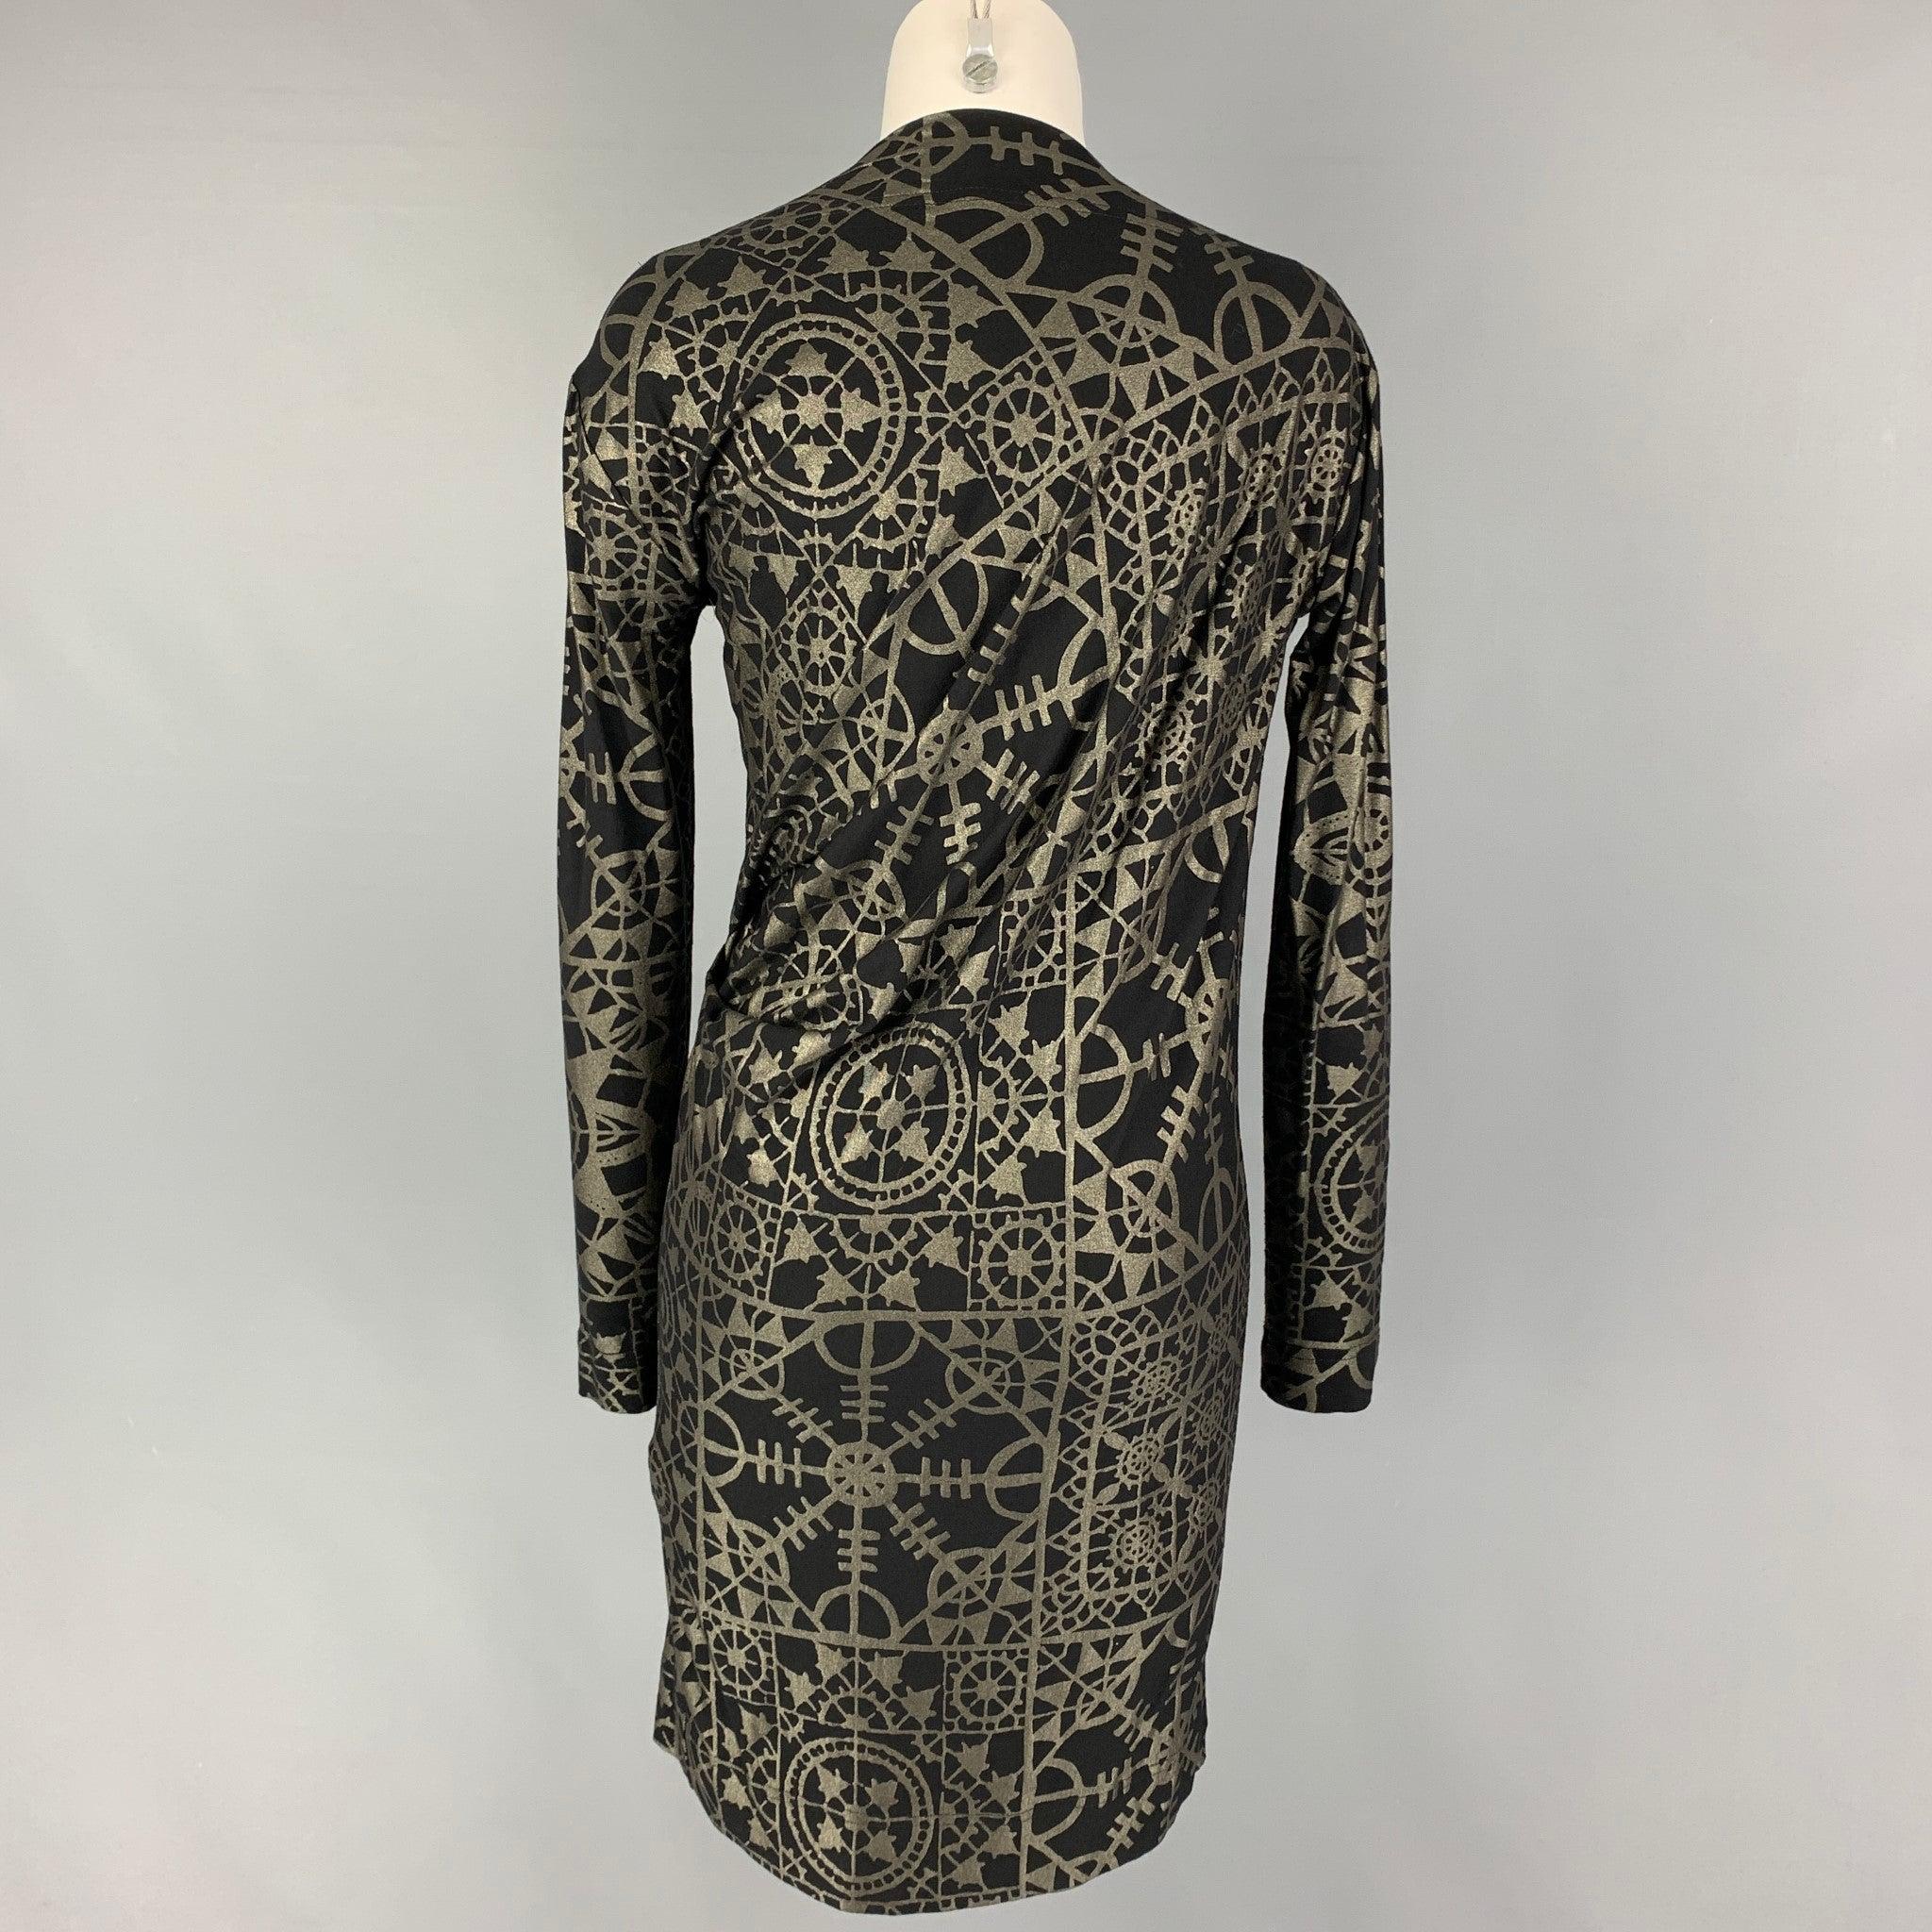 VIVIENNE WESTWOOD ANGLOMANIA Size S Black Silver Viscose Blend Abstract Dress In Good Condition For Sale In San Francisco, CA